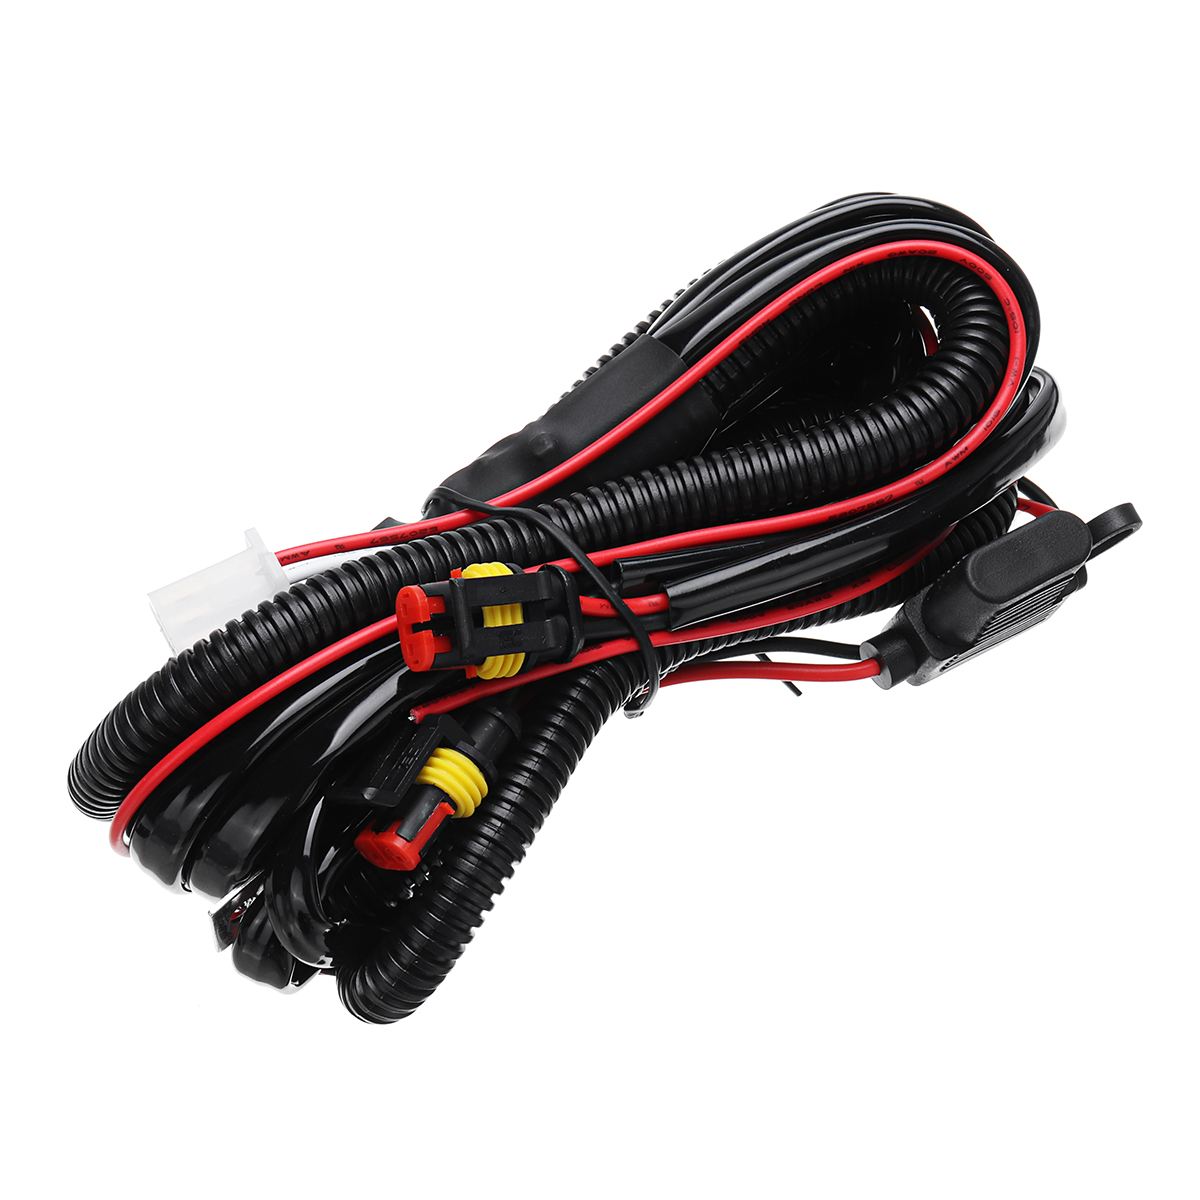 10A-Relsy-Switch-Fog-Light--Spot-Wiring-Loom-Harness-Kit--For-Motorcycle-Car-1350426